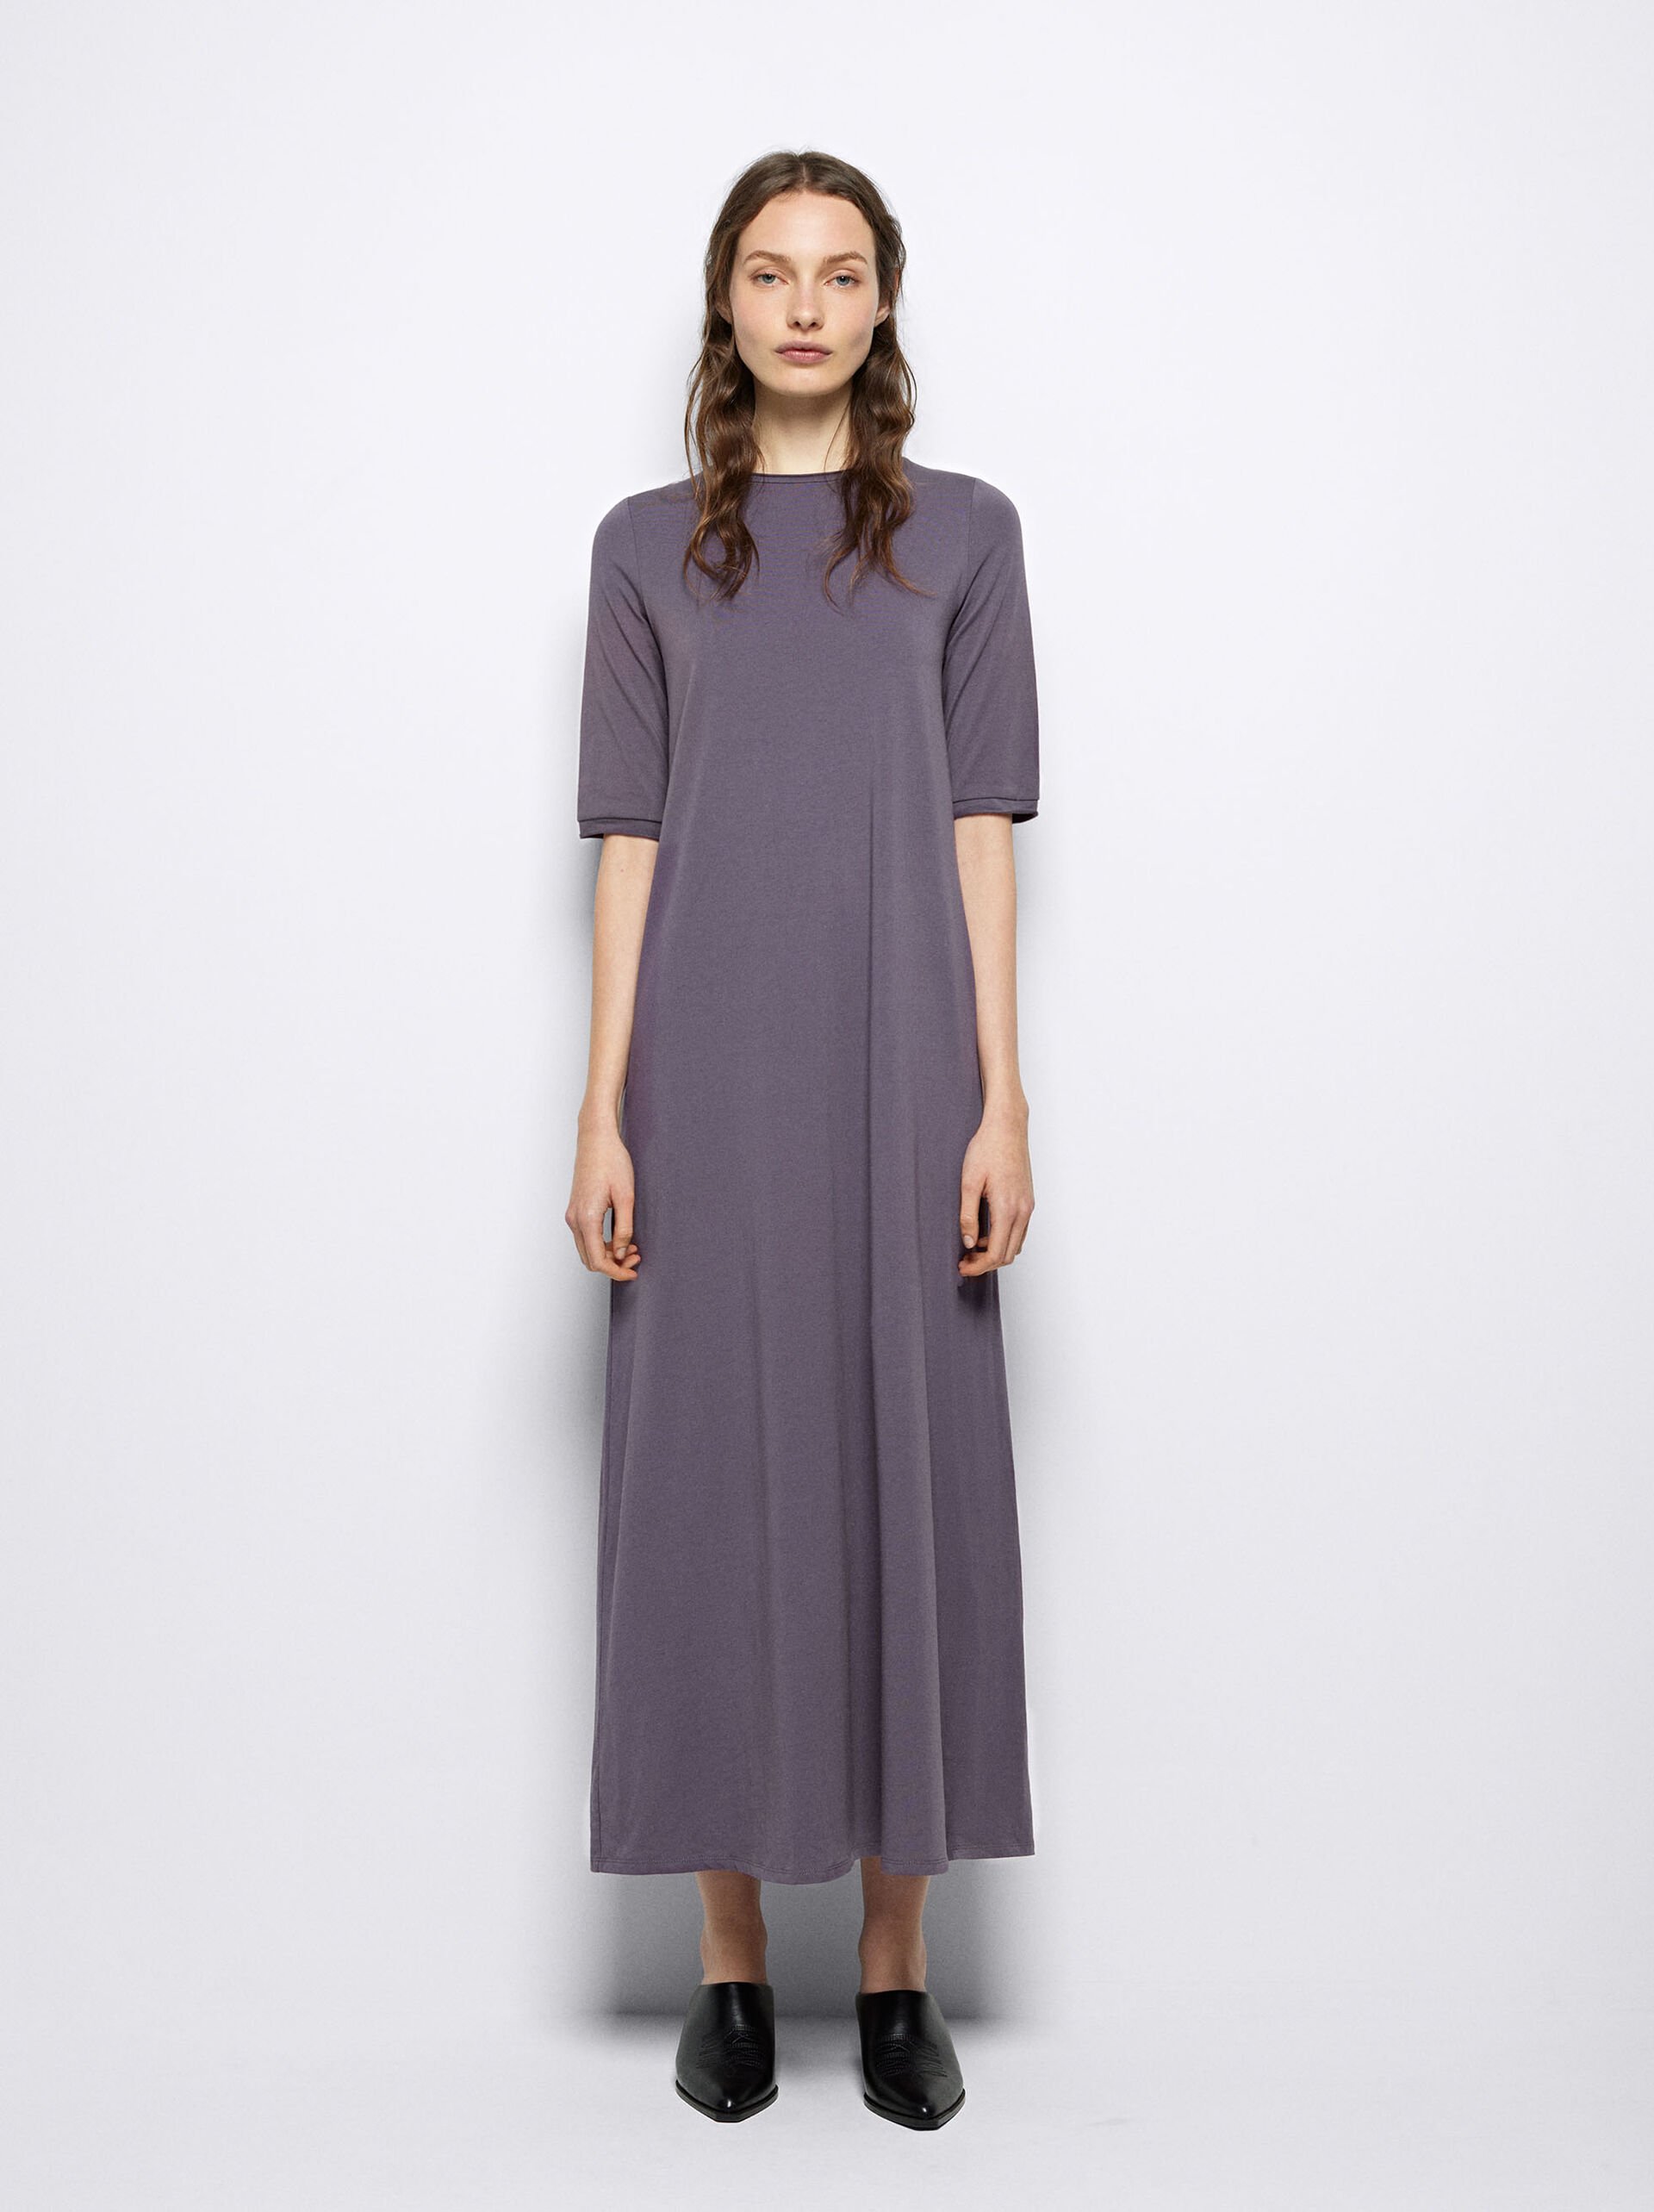 Flowy Cotton Dress image number 1.0